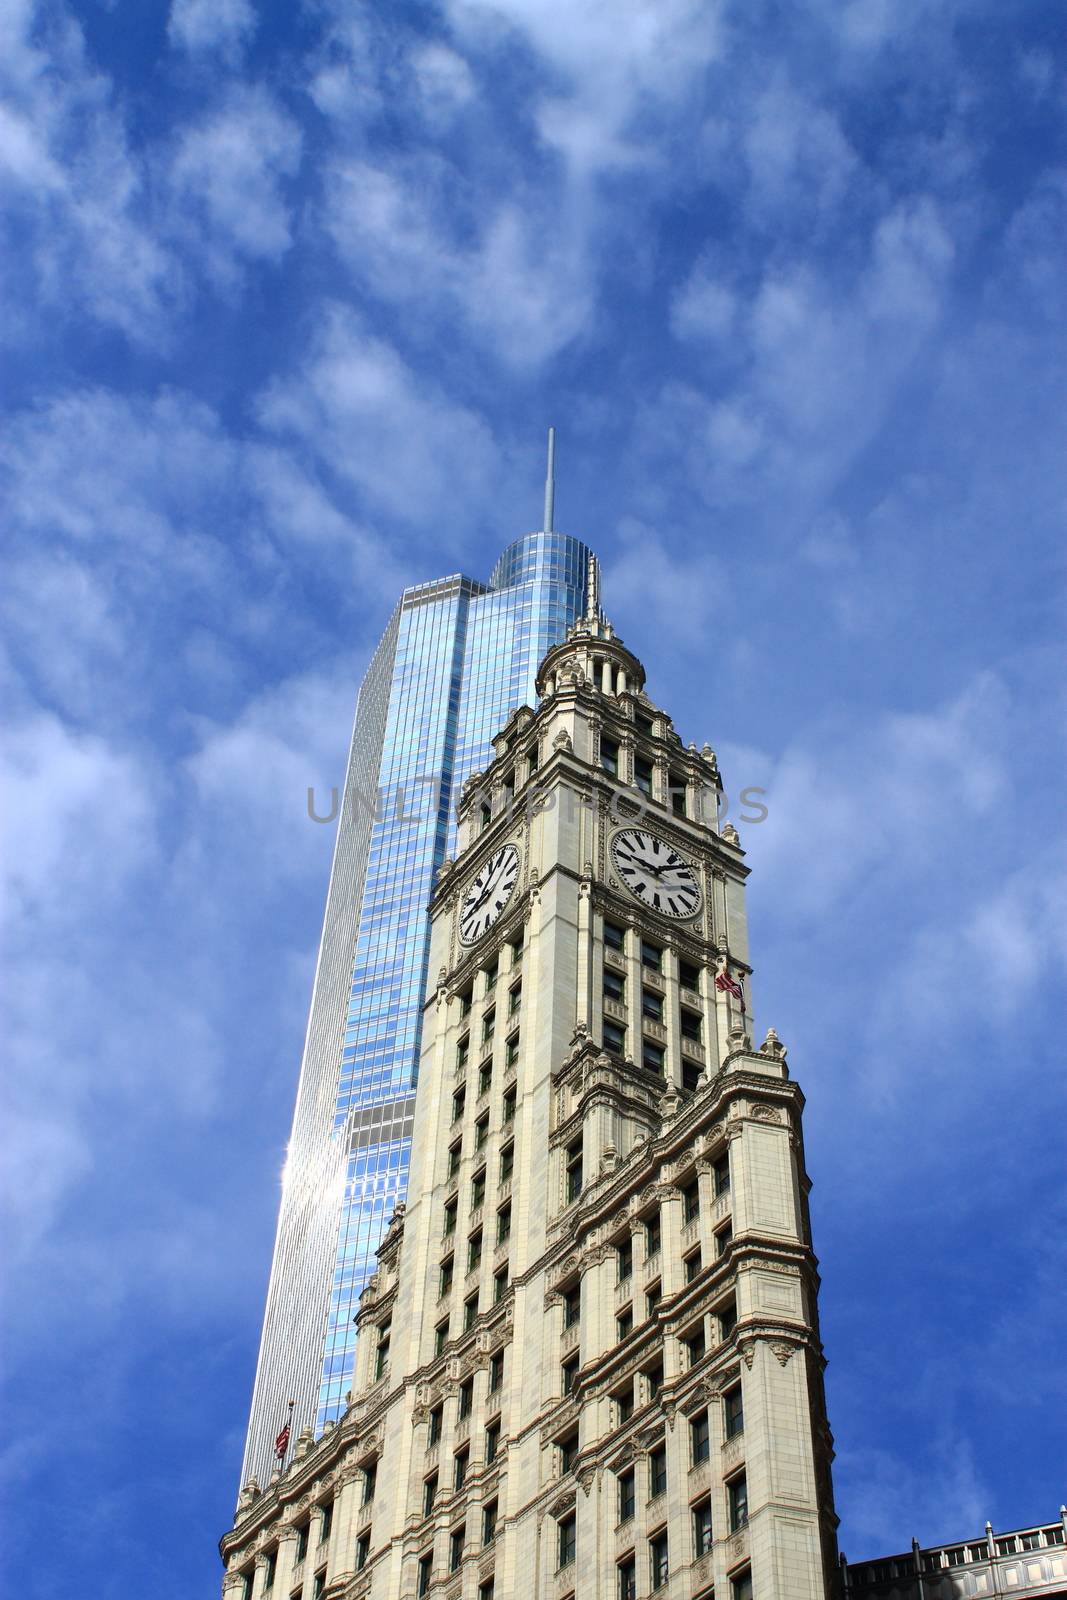 Wrigley Building - Chicago by Ffooter